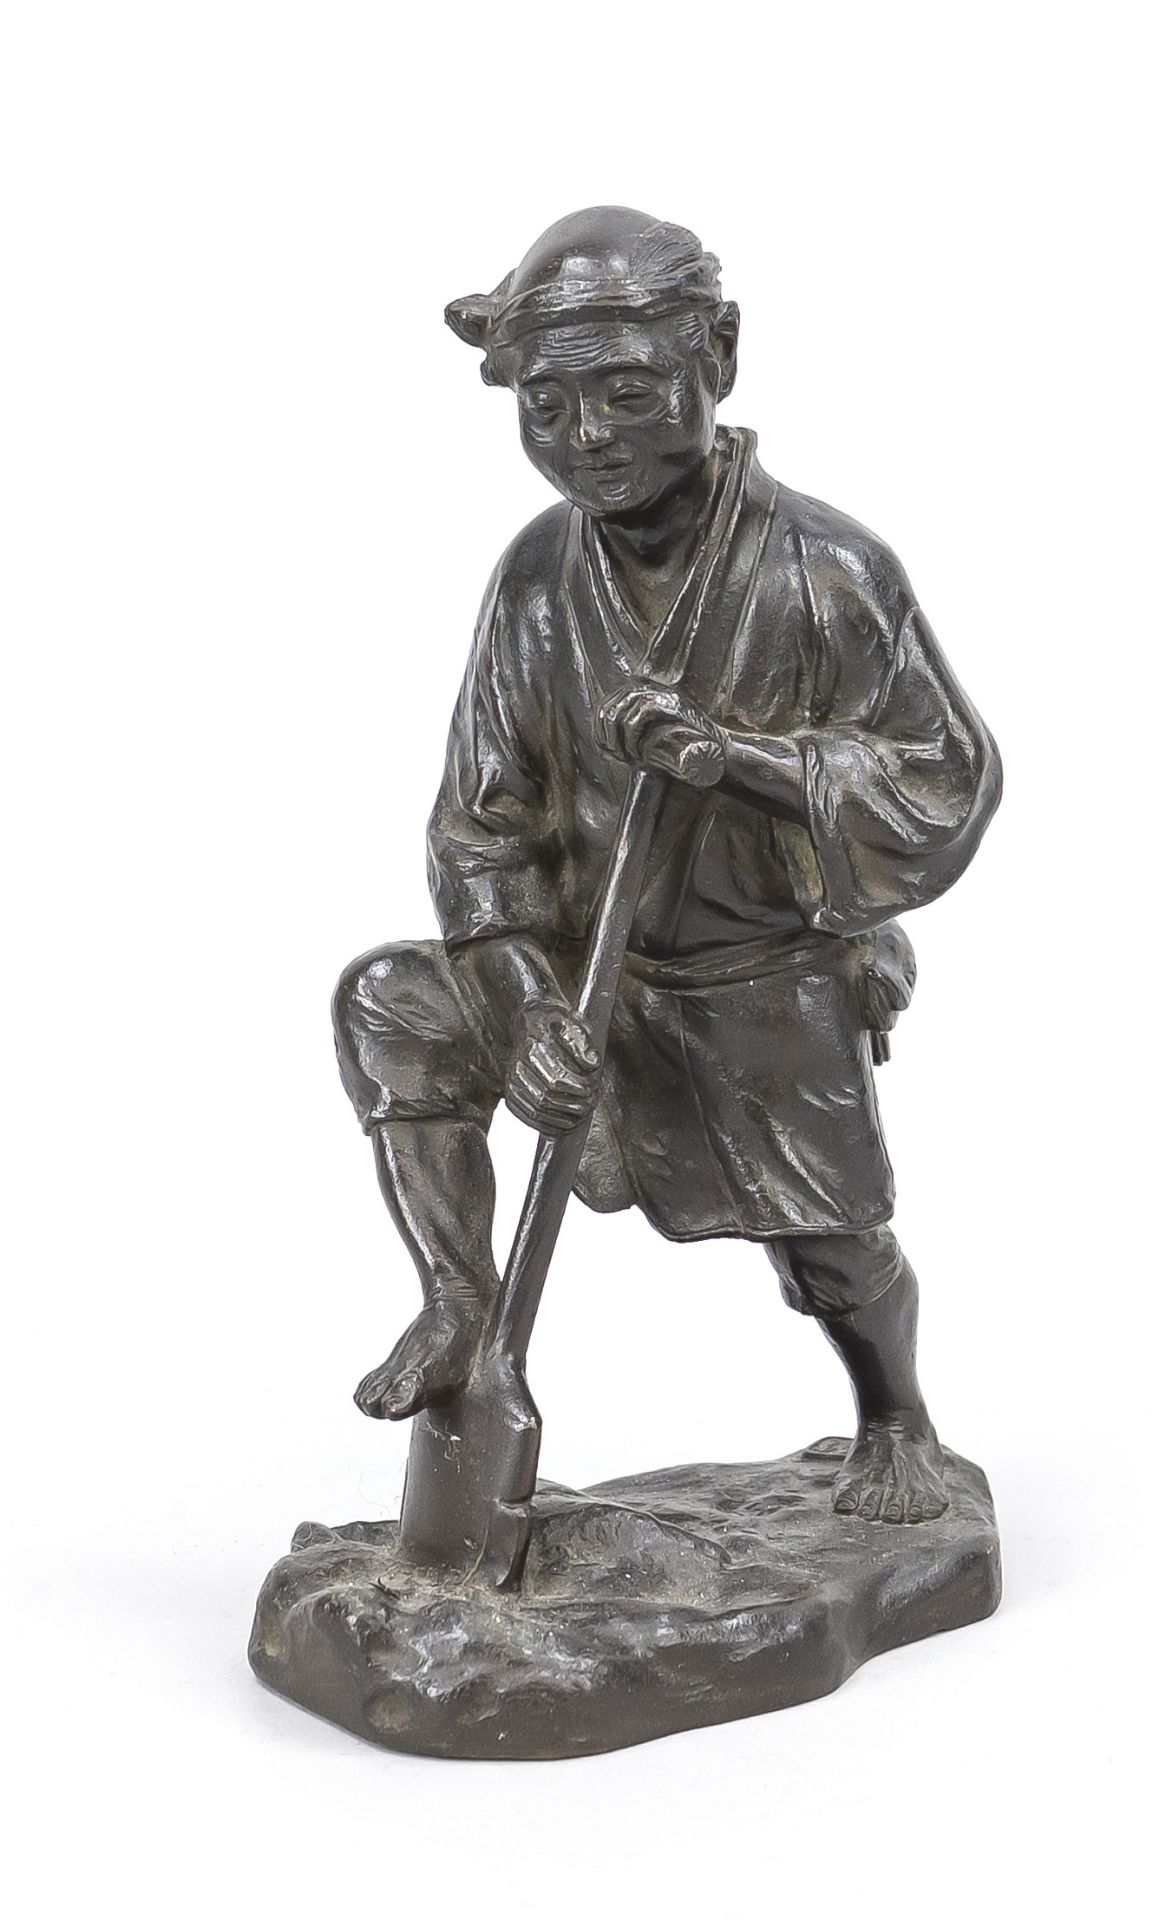 Farmer with spade, China, probably Republic period, bronze. On a terrain plinth. Signed/marked in